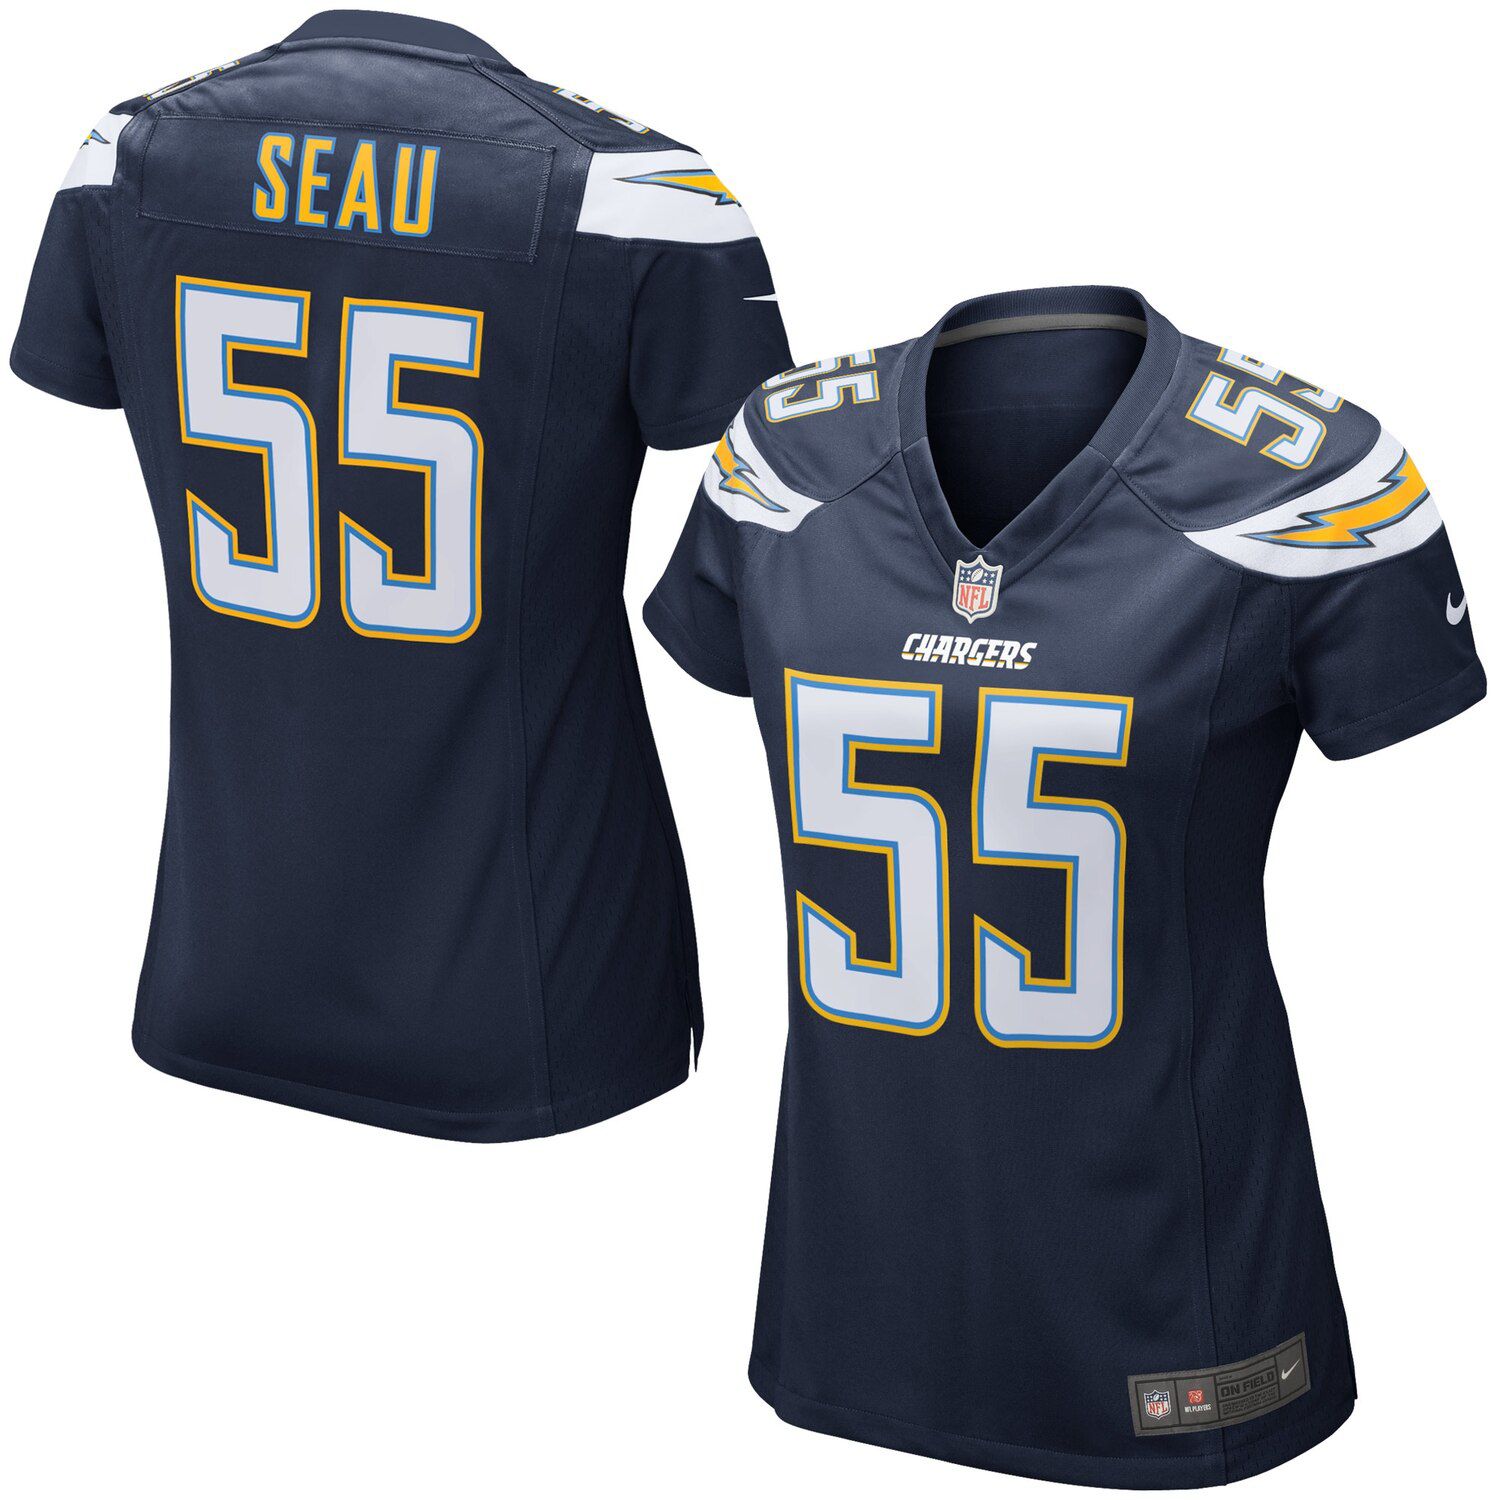 san diego chargers junior seau jersey